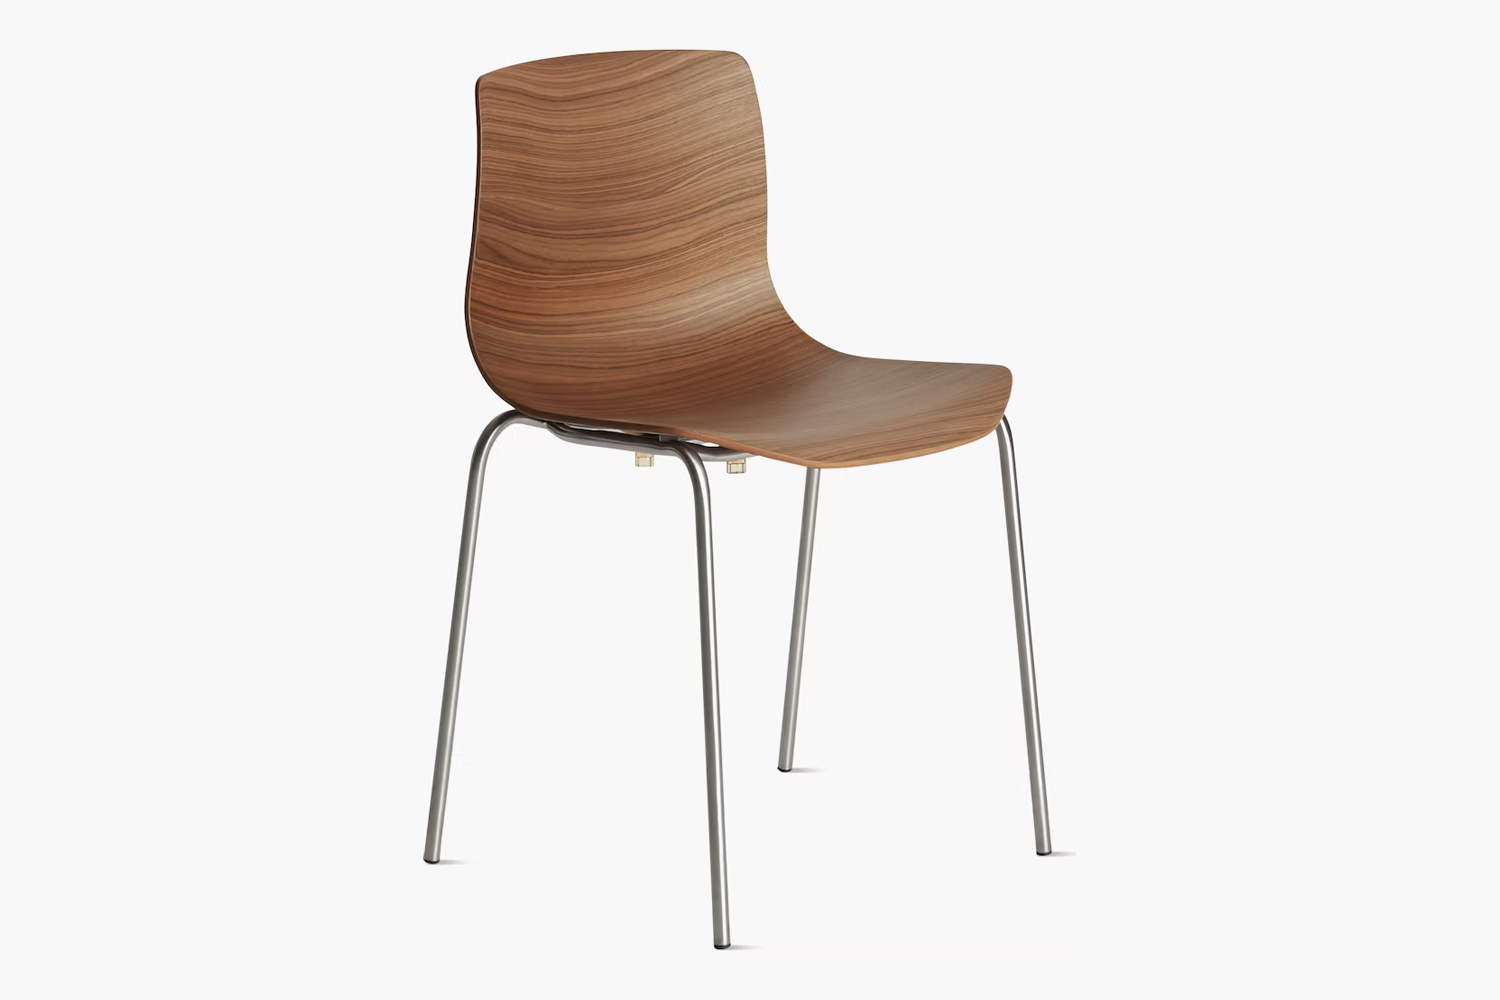 designed by shin azumi, the loku side chair is \$495 at design within reach. 20